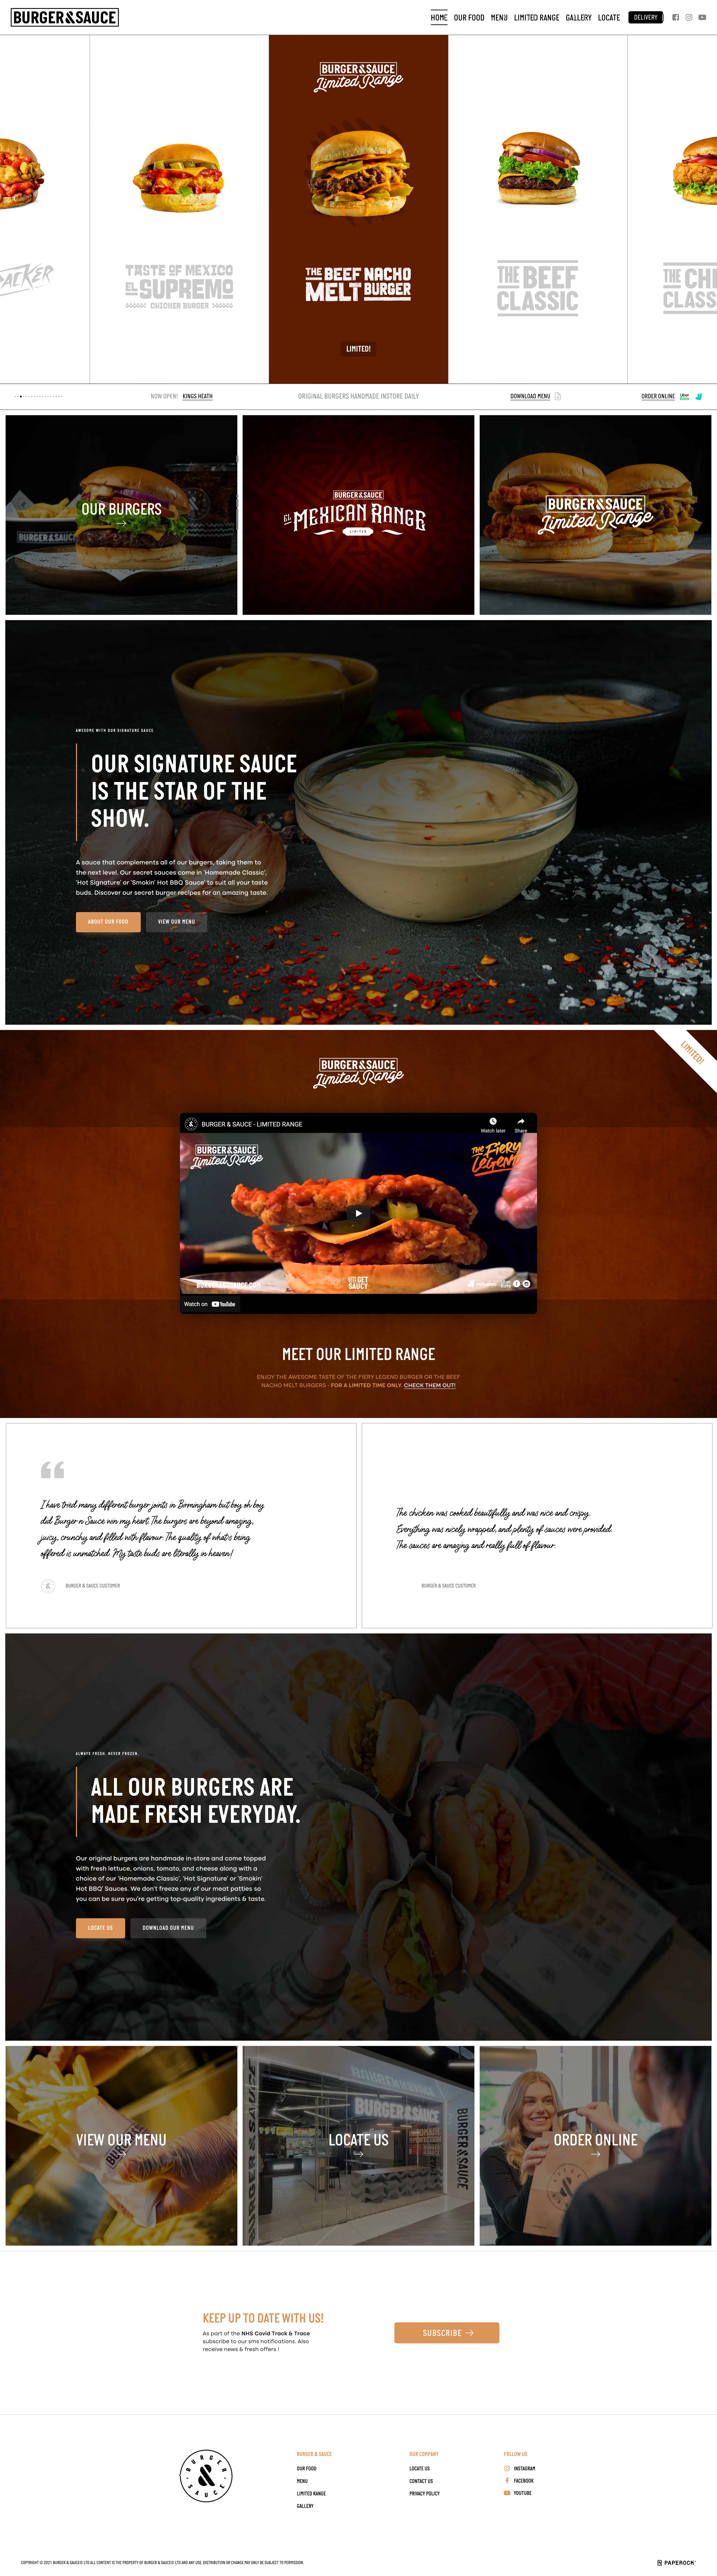 Burger & Sauce 2021 Home Page